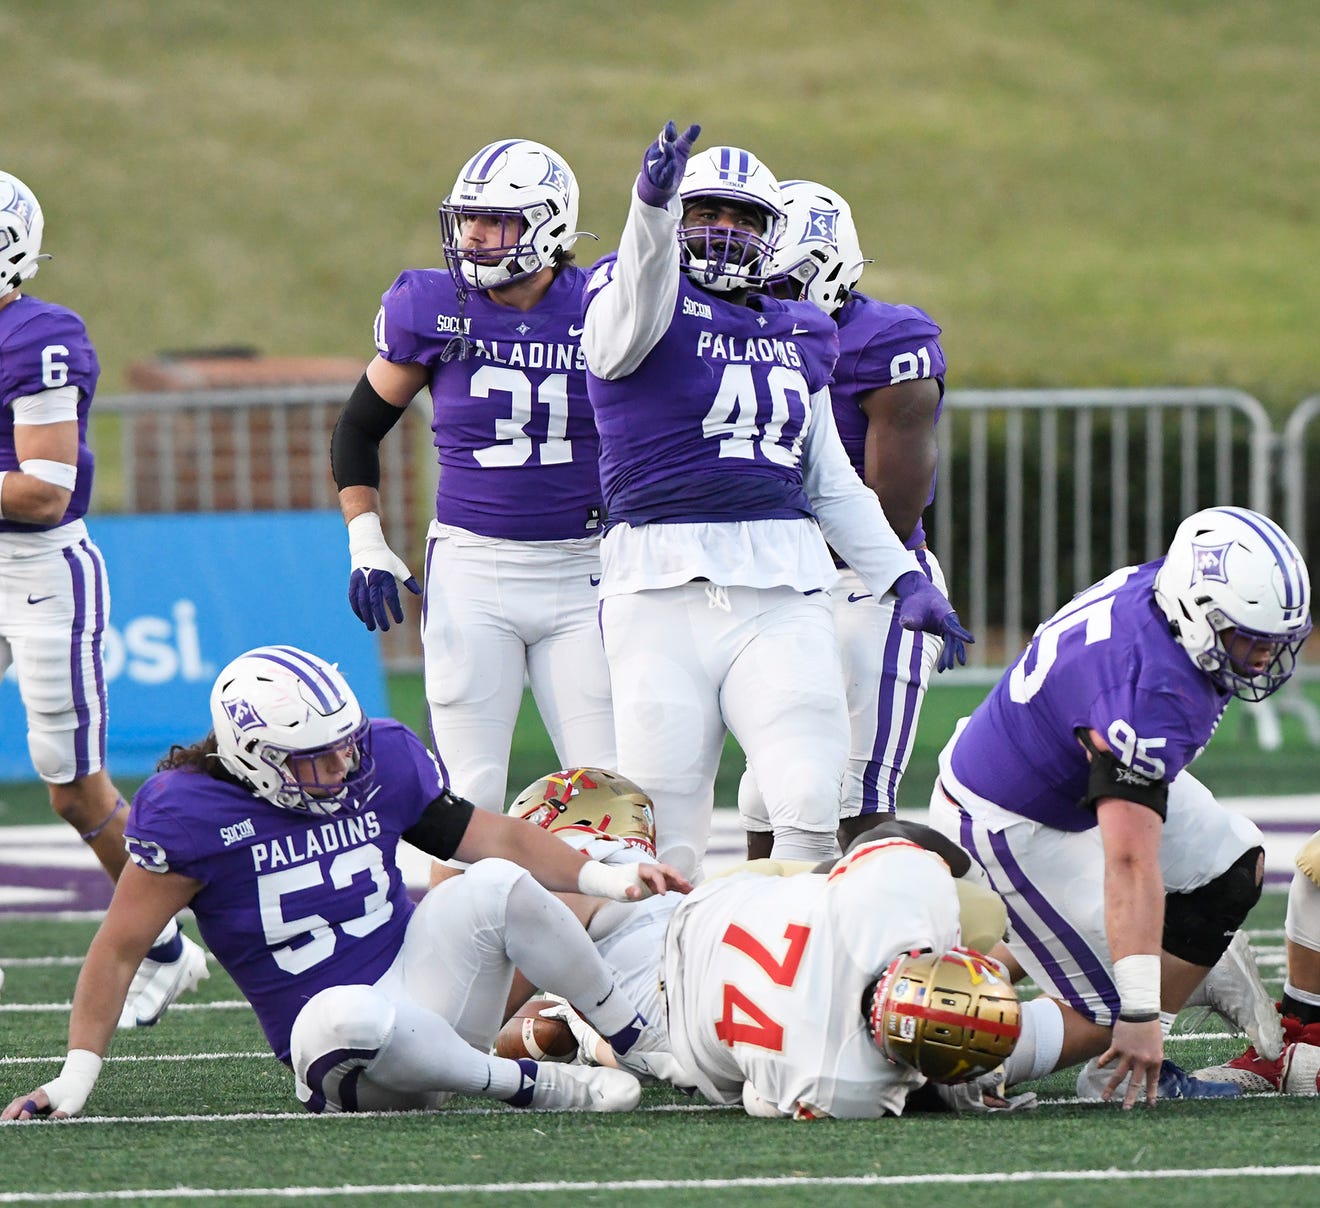 Furman's 2022 football schedule offers early opportunities for upsets